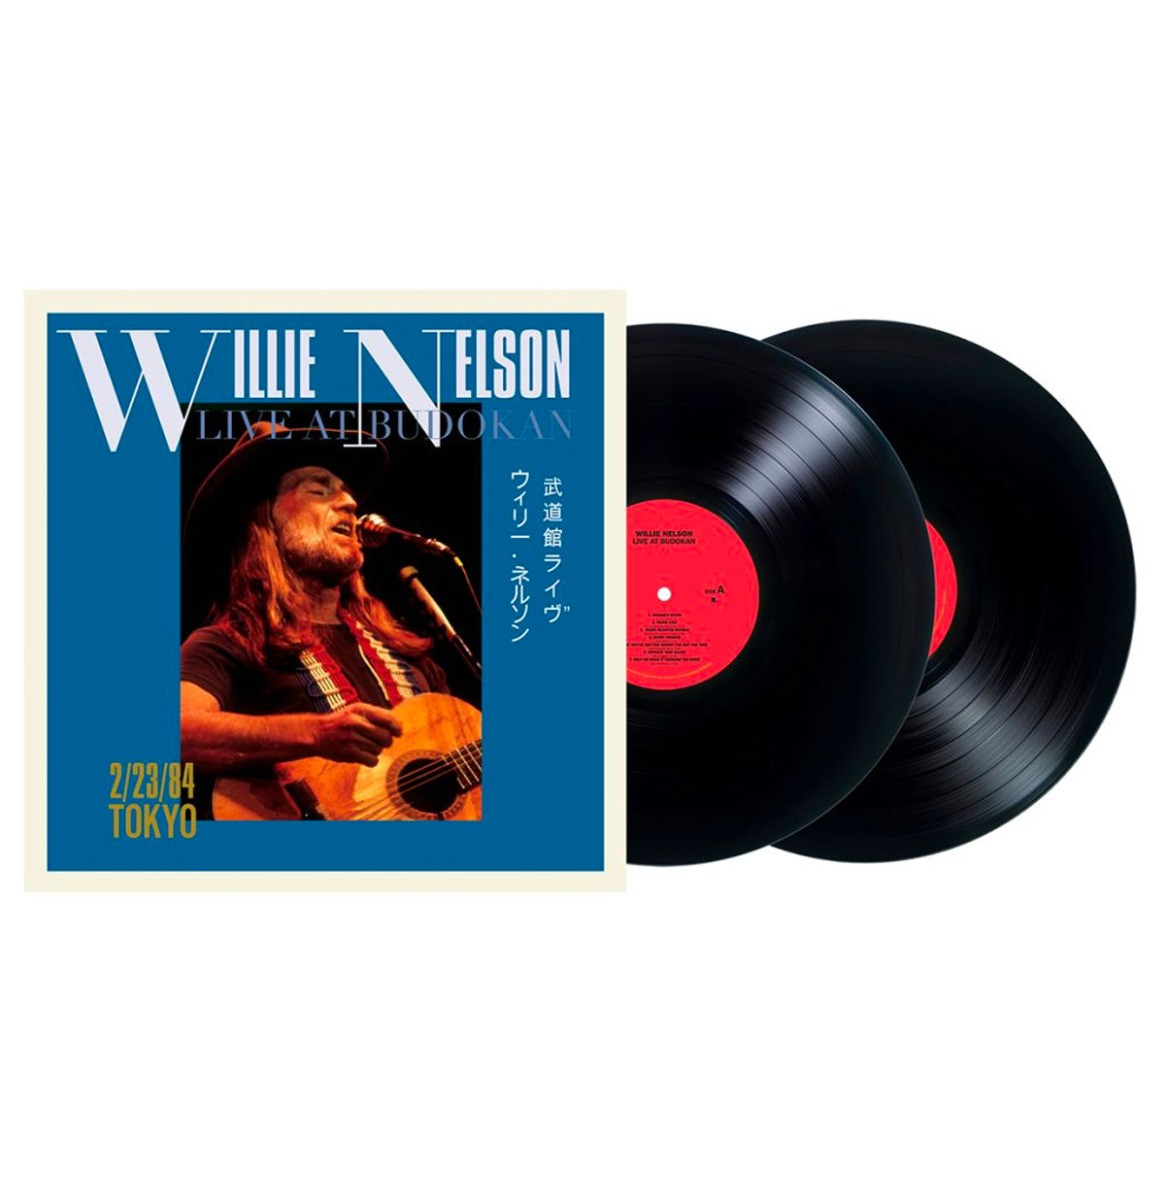 Willie Nelson - Live At Budokan (Record Store Day Black Friday 2022) LP